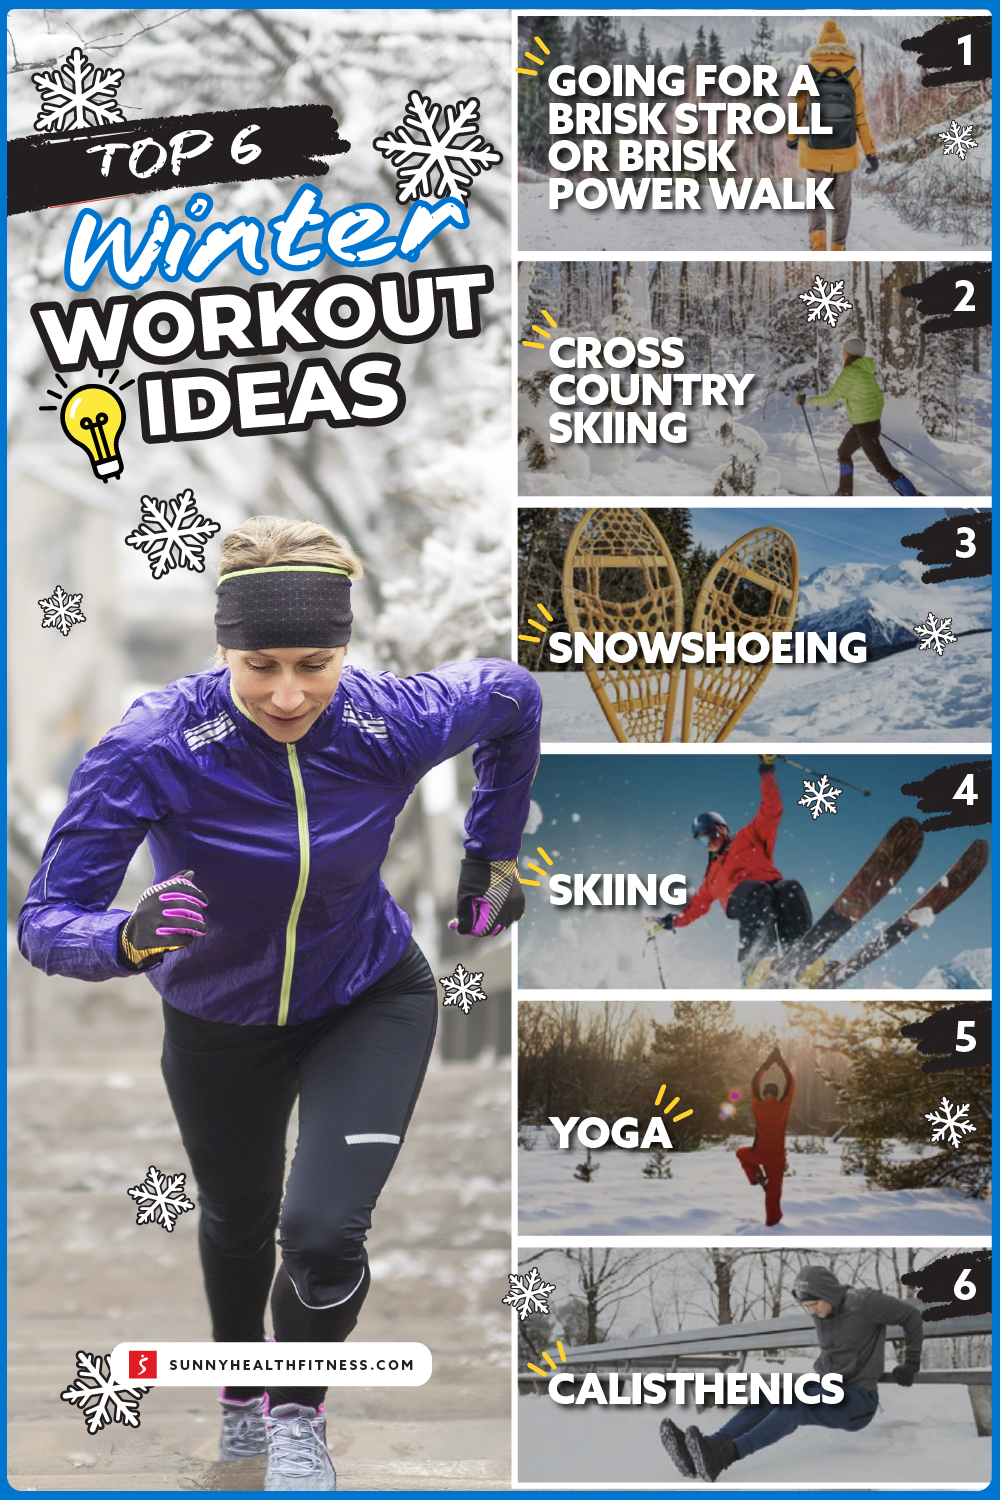 Top 6 Winter Workout Ideas infographic